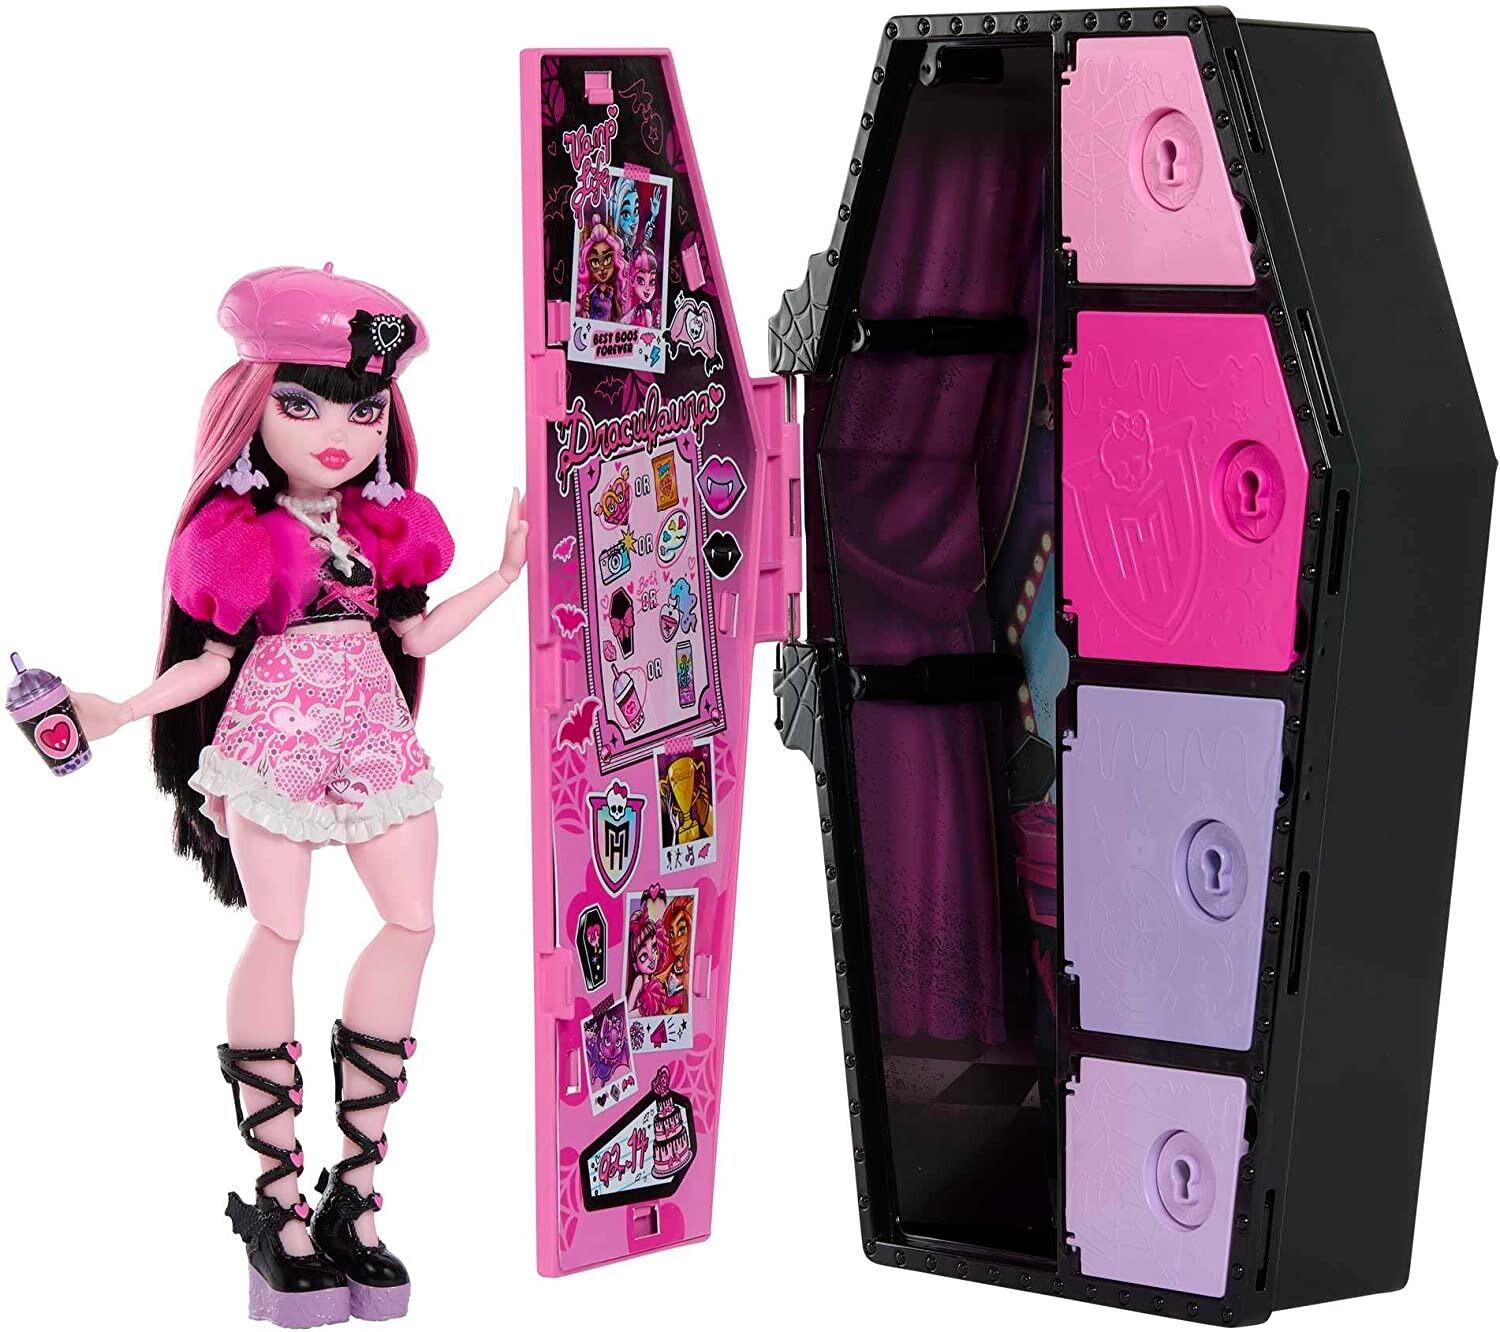 Monster High Skulltimate Secrets Doll and Fashion Set, Draculaura with Dress-Up Locker and 19+ Accessories